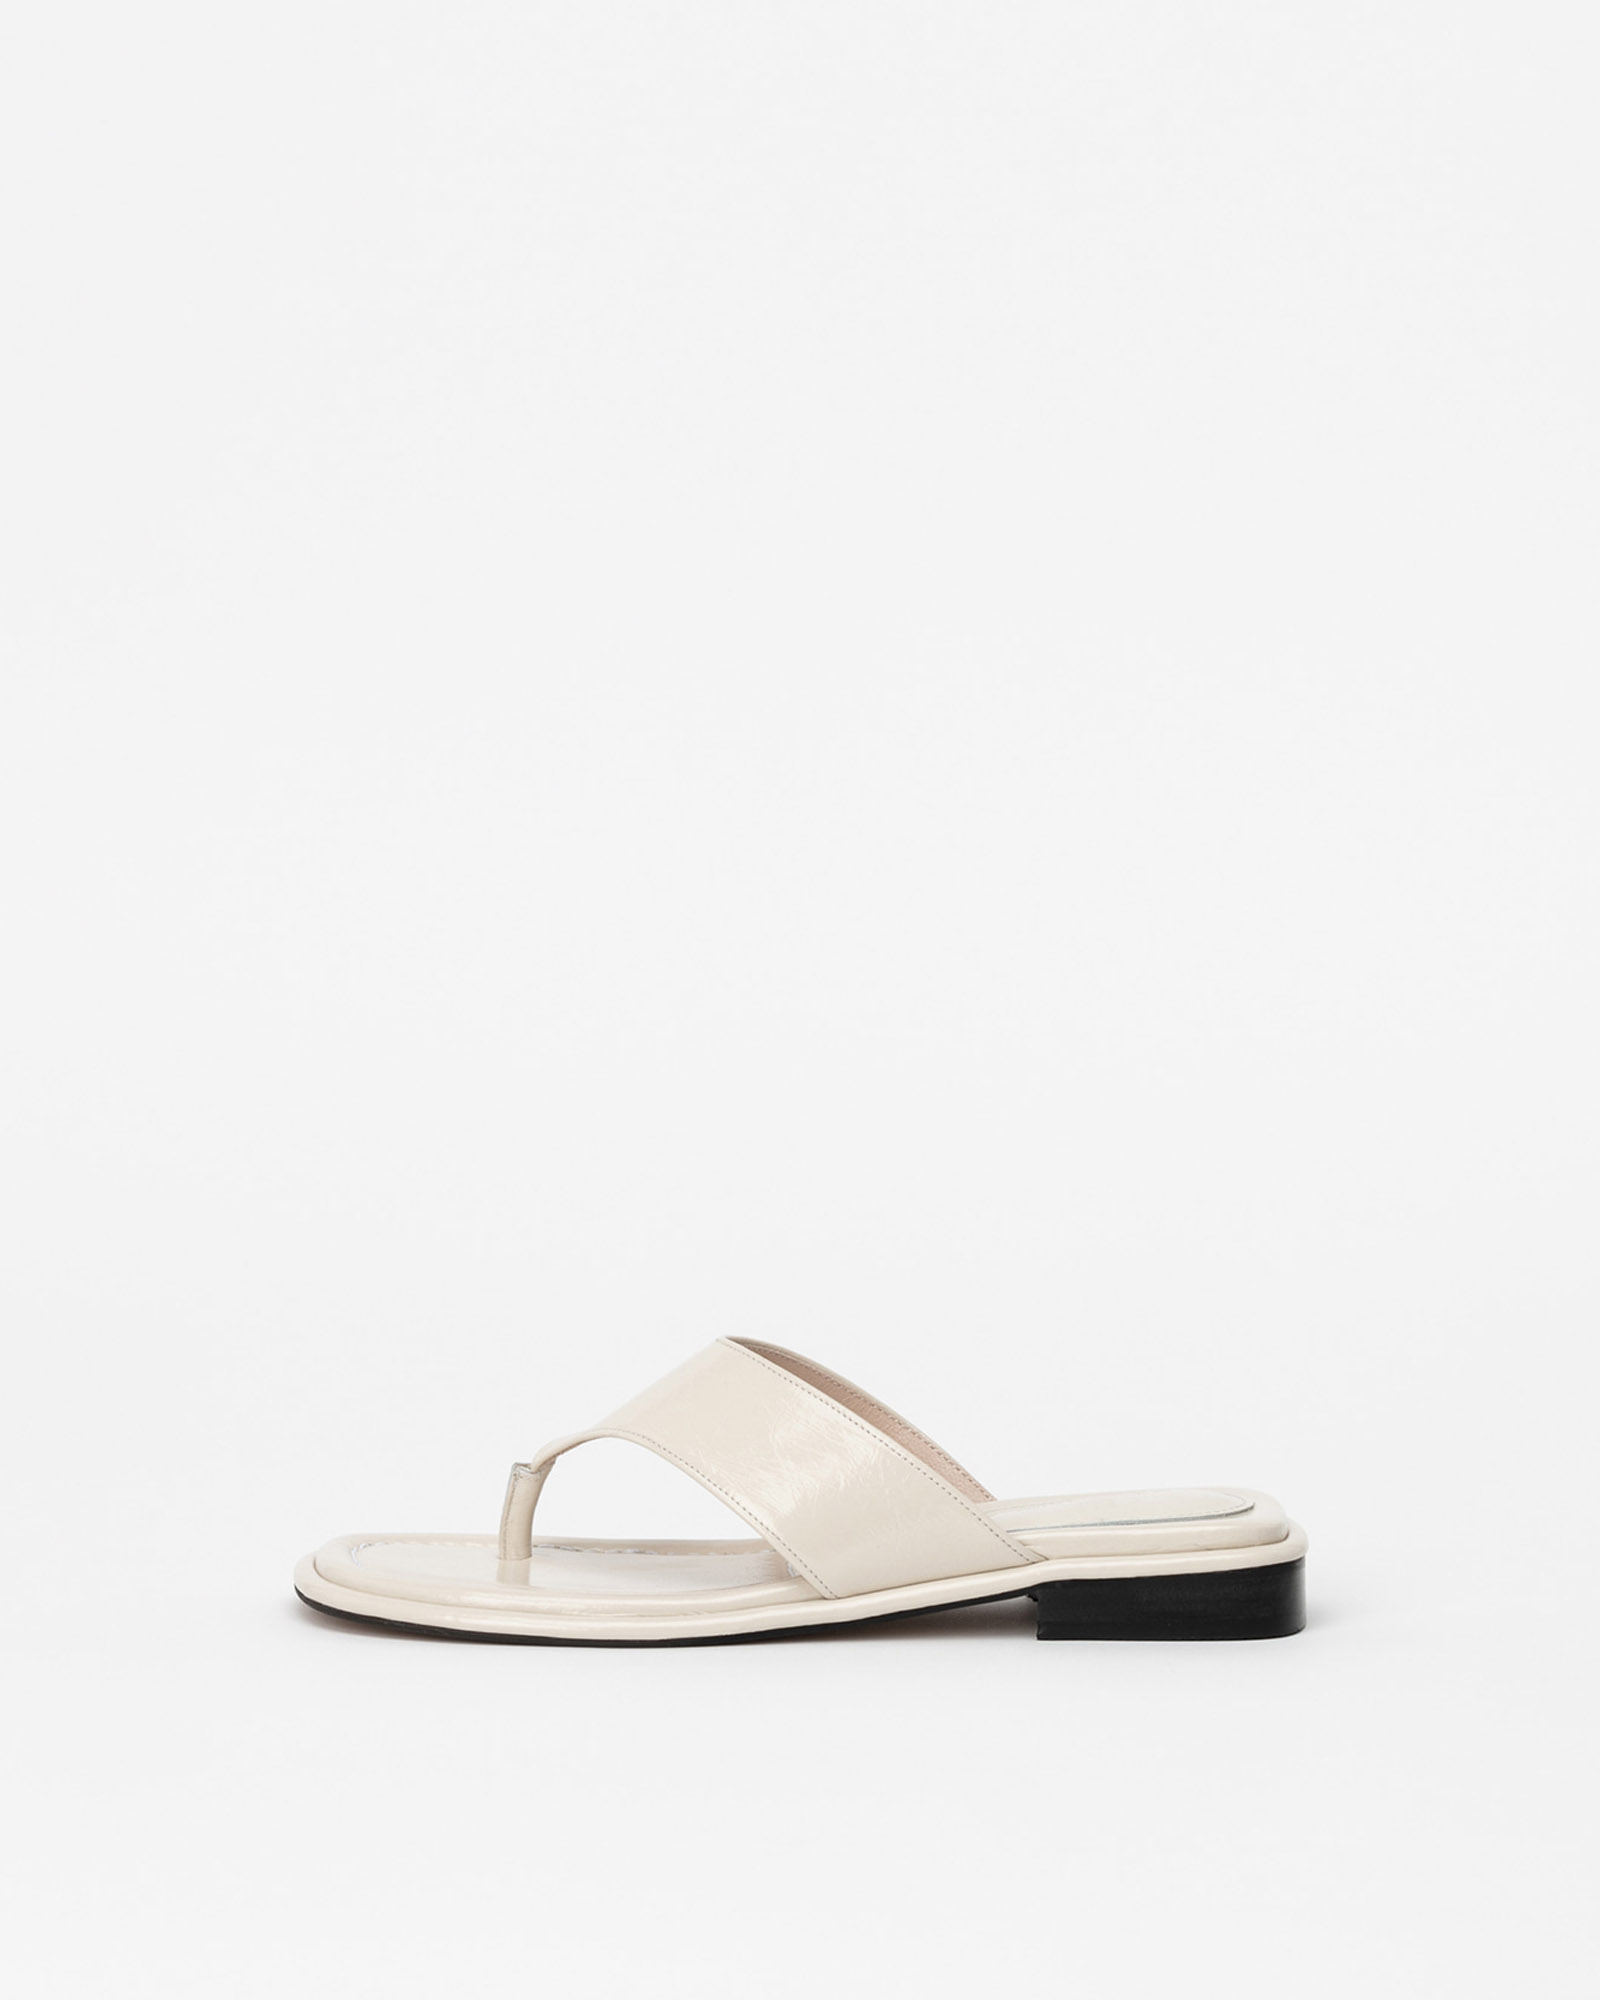 Sona Flat Thong Sandals in Wrinkled Ivory